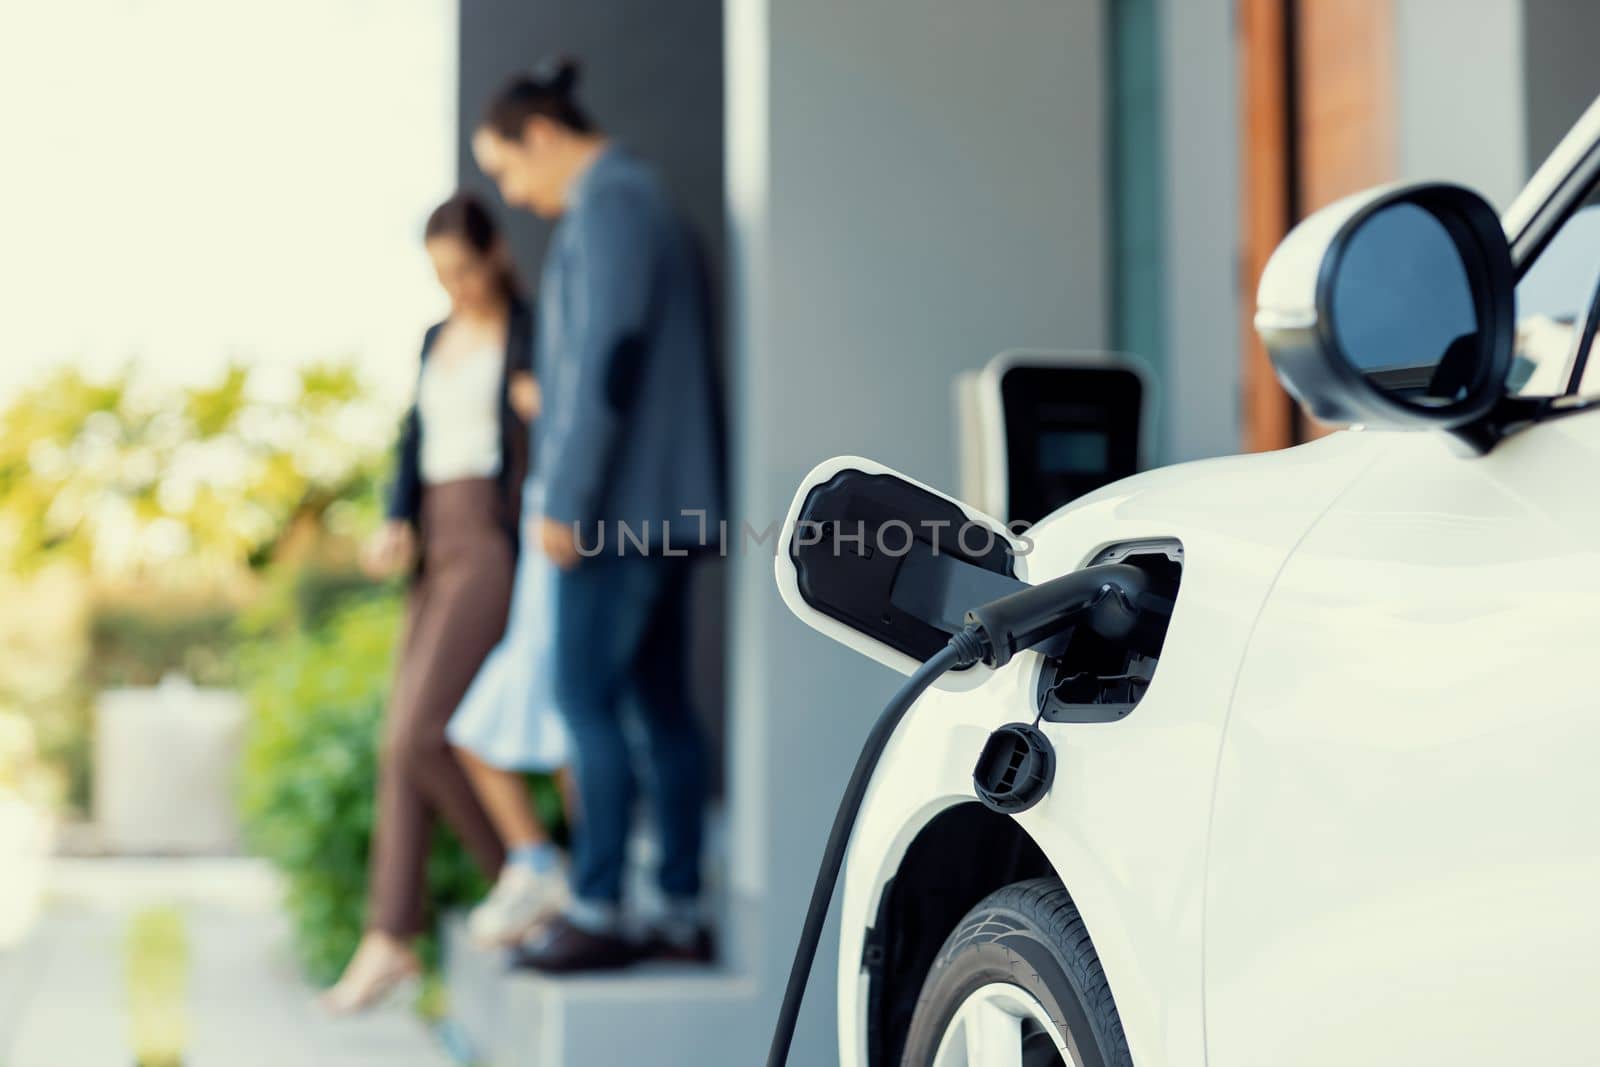 Focus closeup electric vehicle recharging battery from home electric charging station with blurred family in background. Renewable clean energy car for progressive eco awareness lifestyle concept.